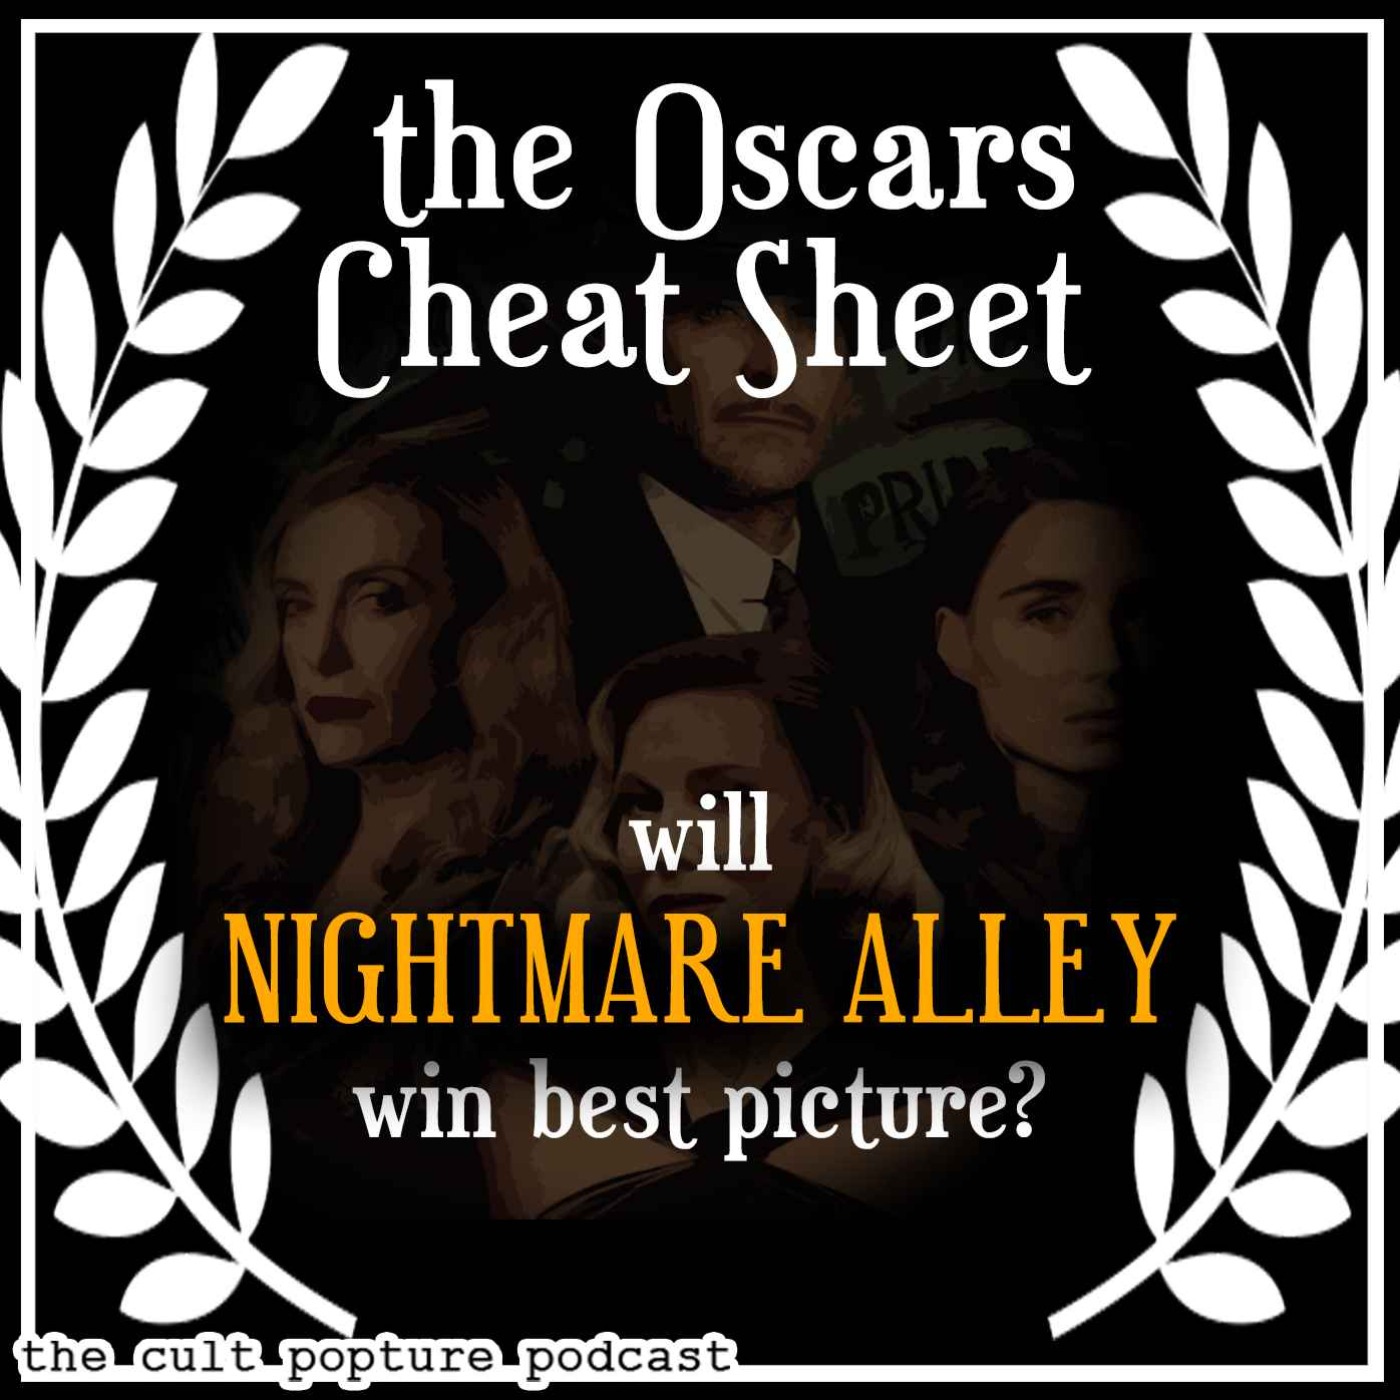 Will NIGHTMARE ALLEY Win Best Picture? | The Oscars Cheat Sheet